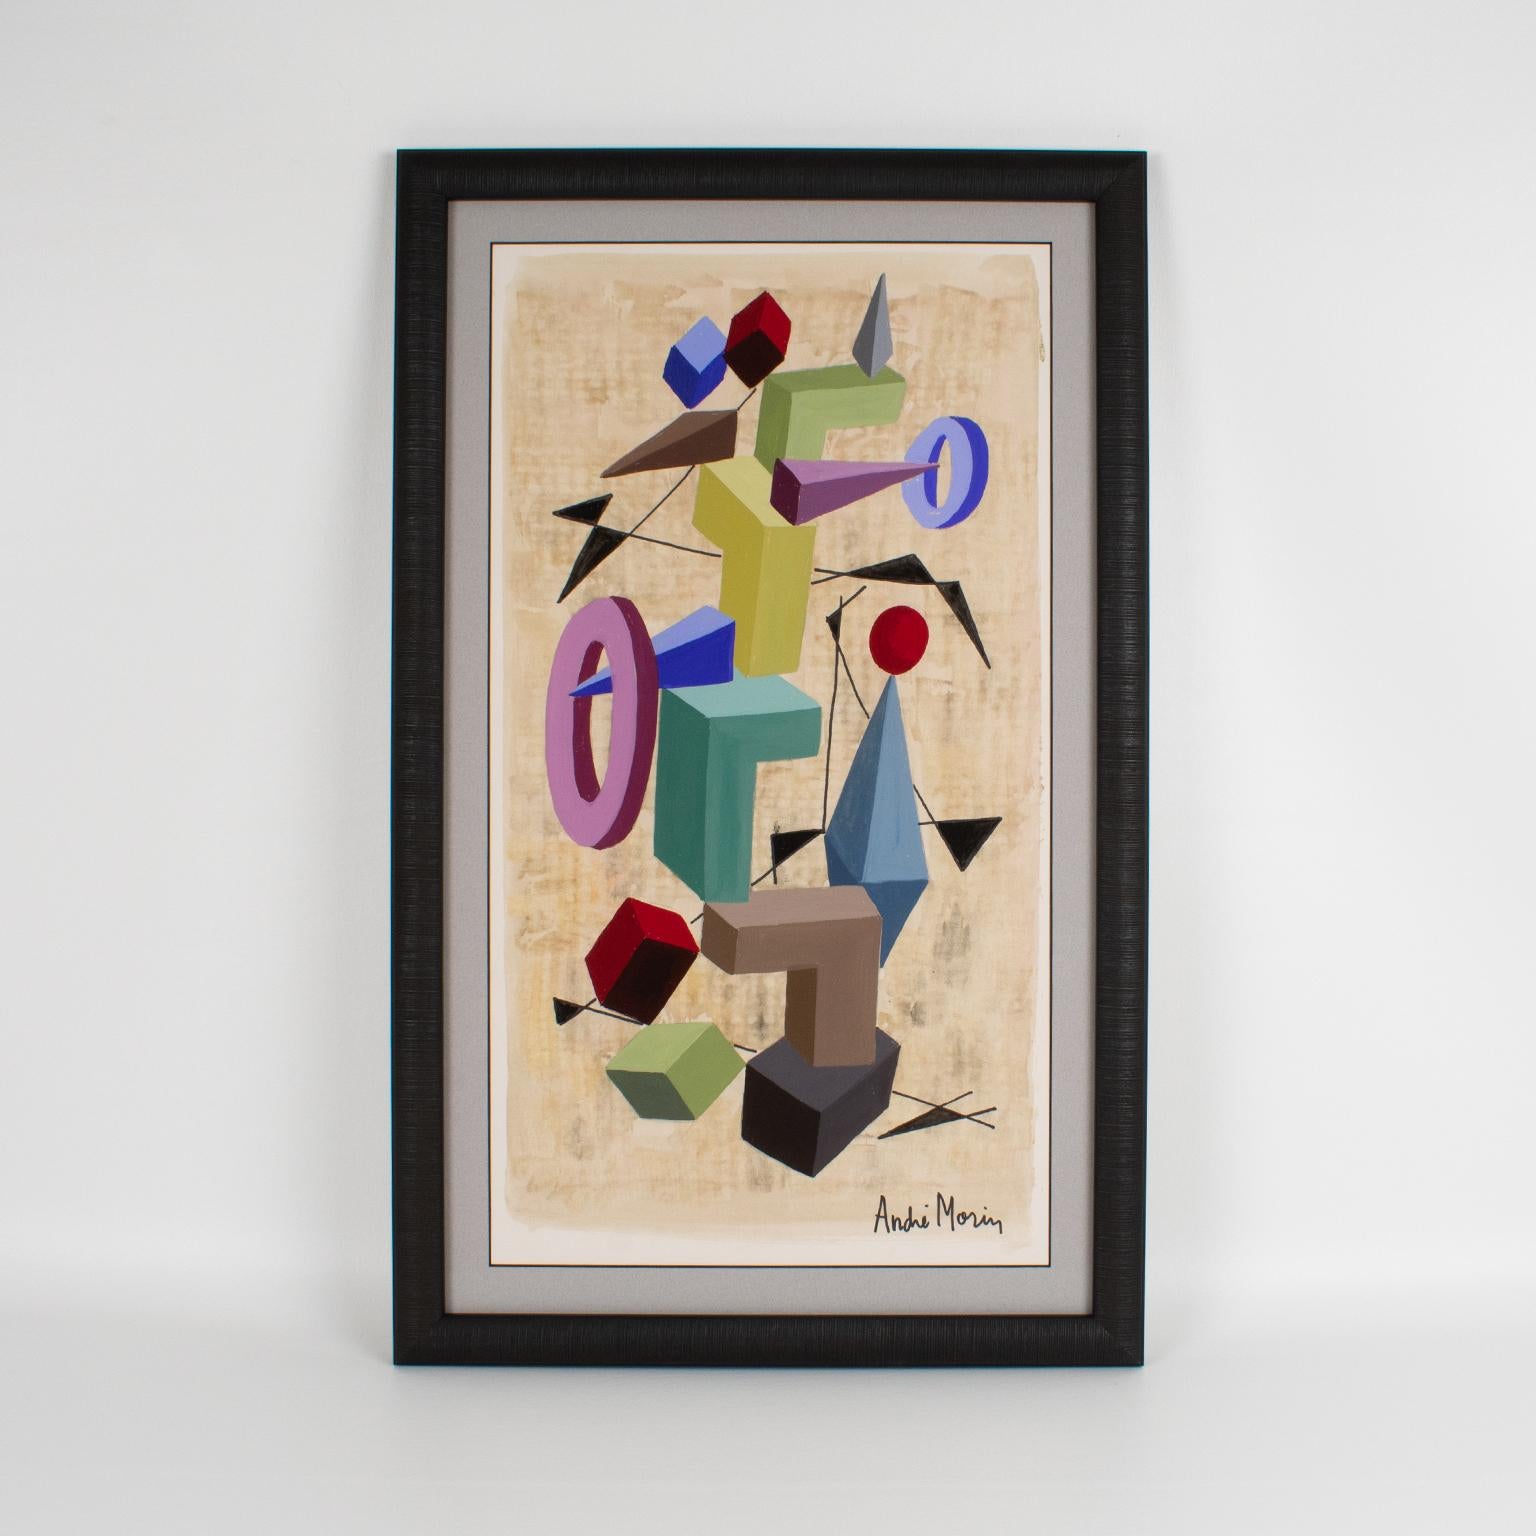 Colorful Geometric Cubist Gouache and Watercolor Painting by André Morin 2